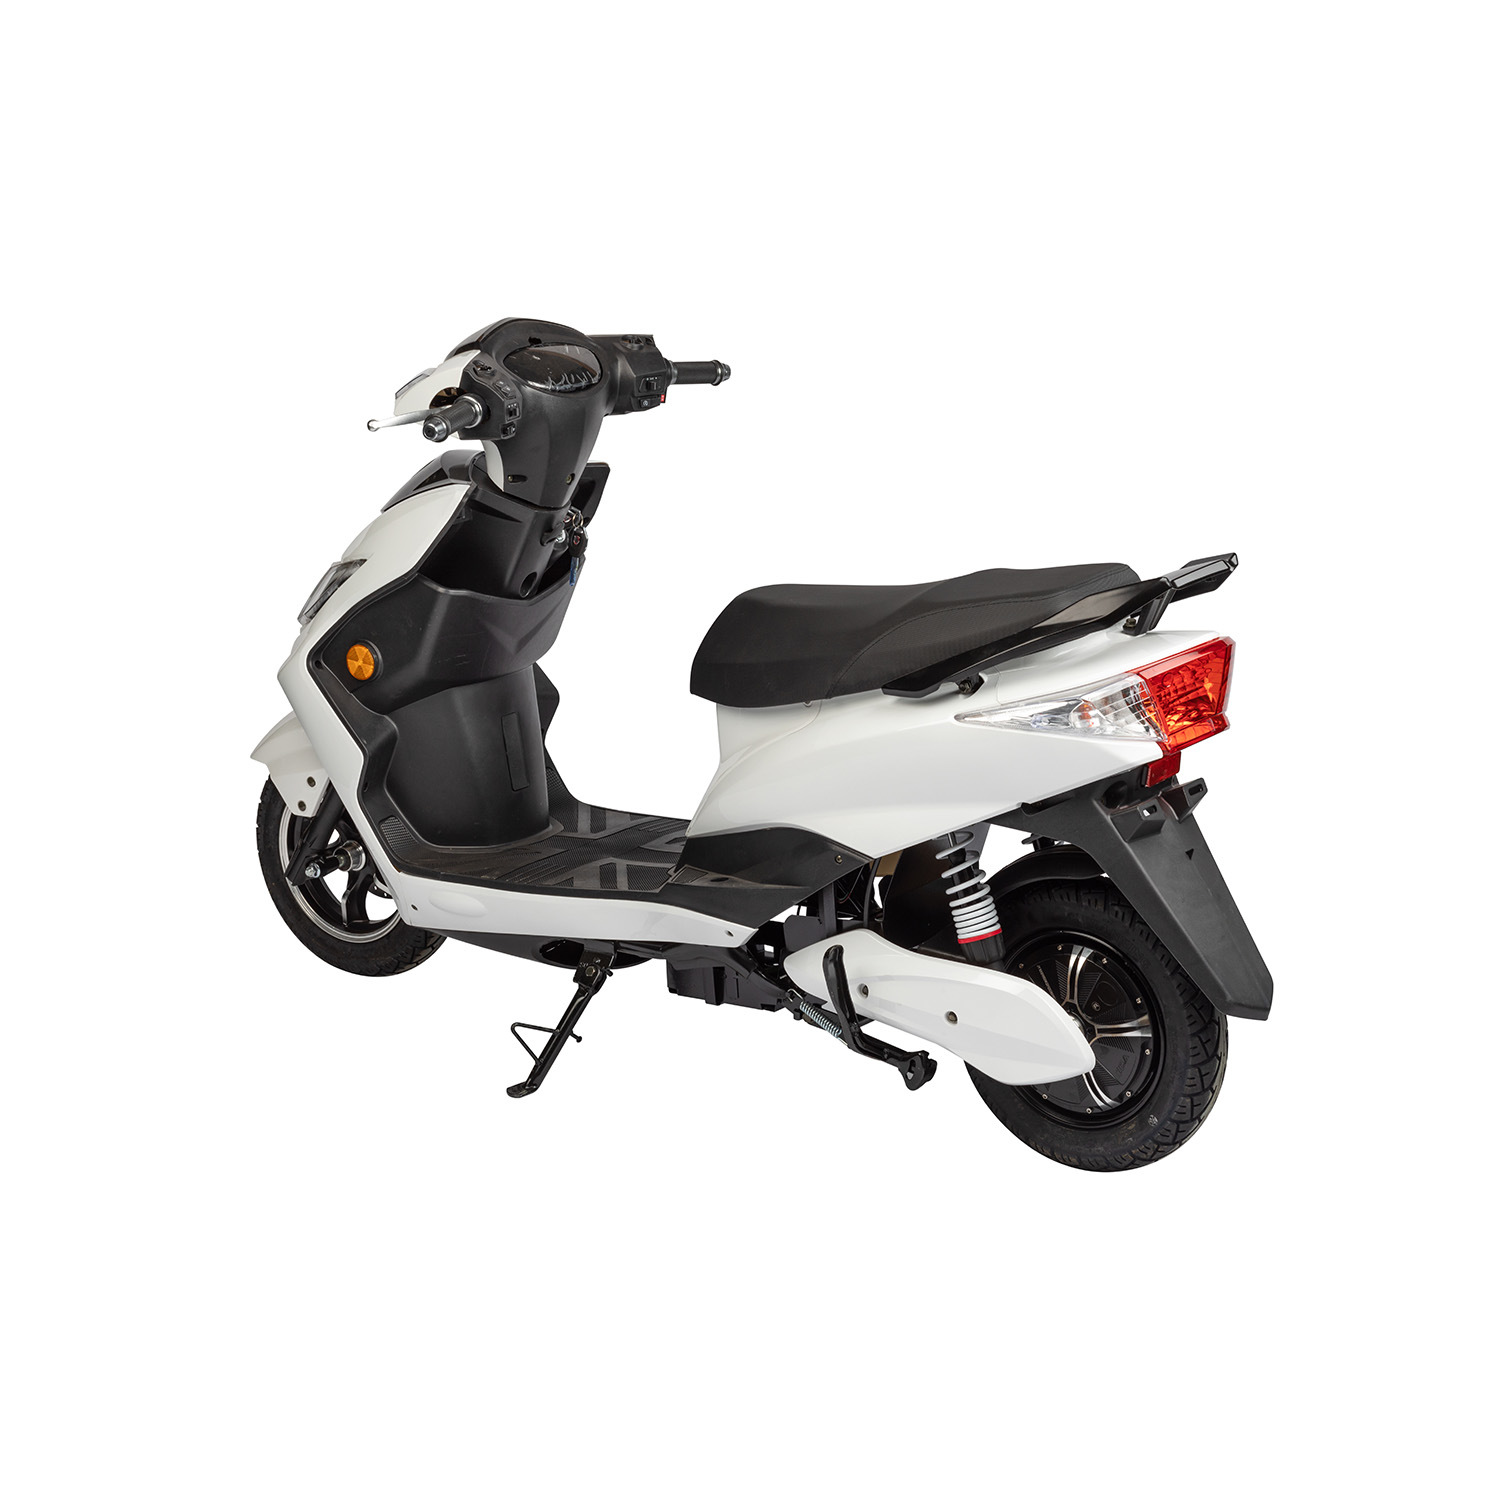 China CKD Cheap Adult Electric Motorcycle 1000W India Ebike Scooter Electric Motorcycle